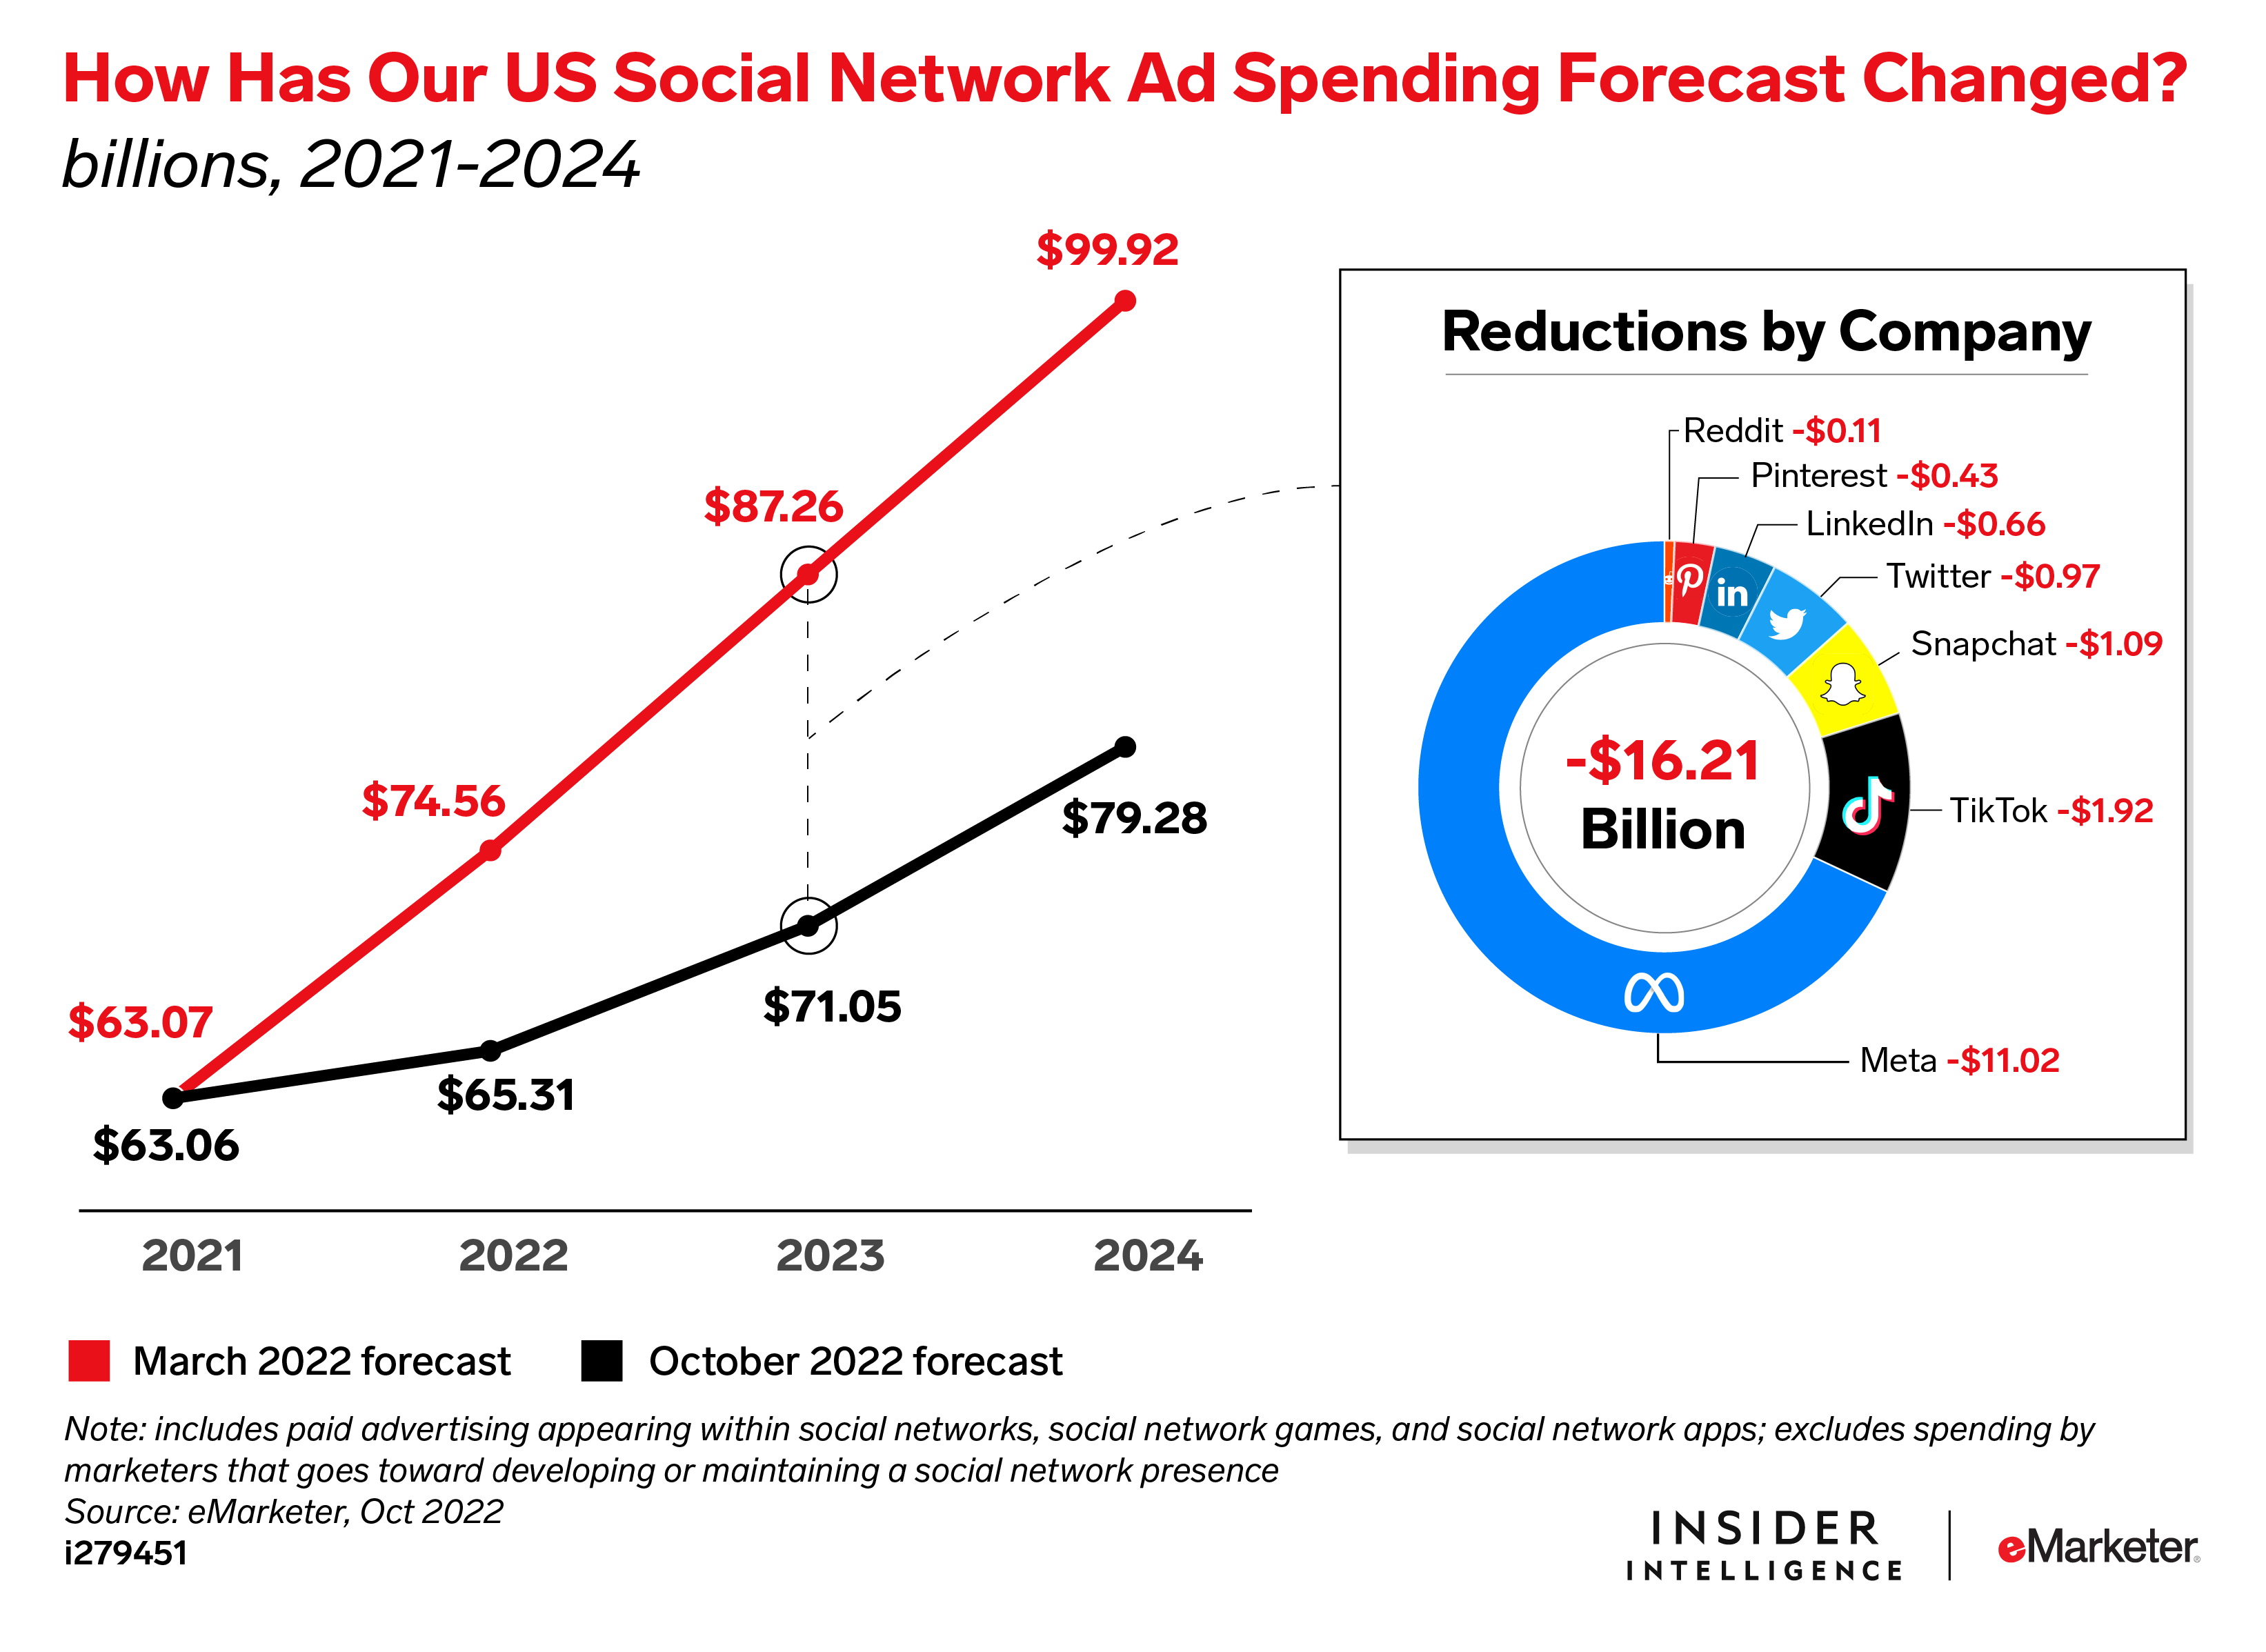 How Has Our US Social Network Ad Spending Forecast Changed?